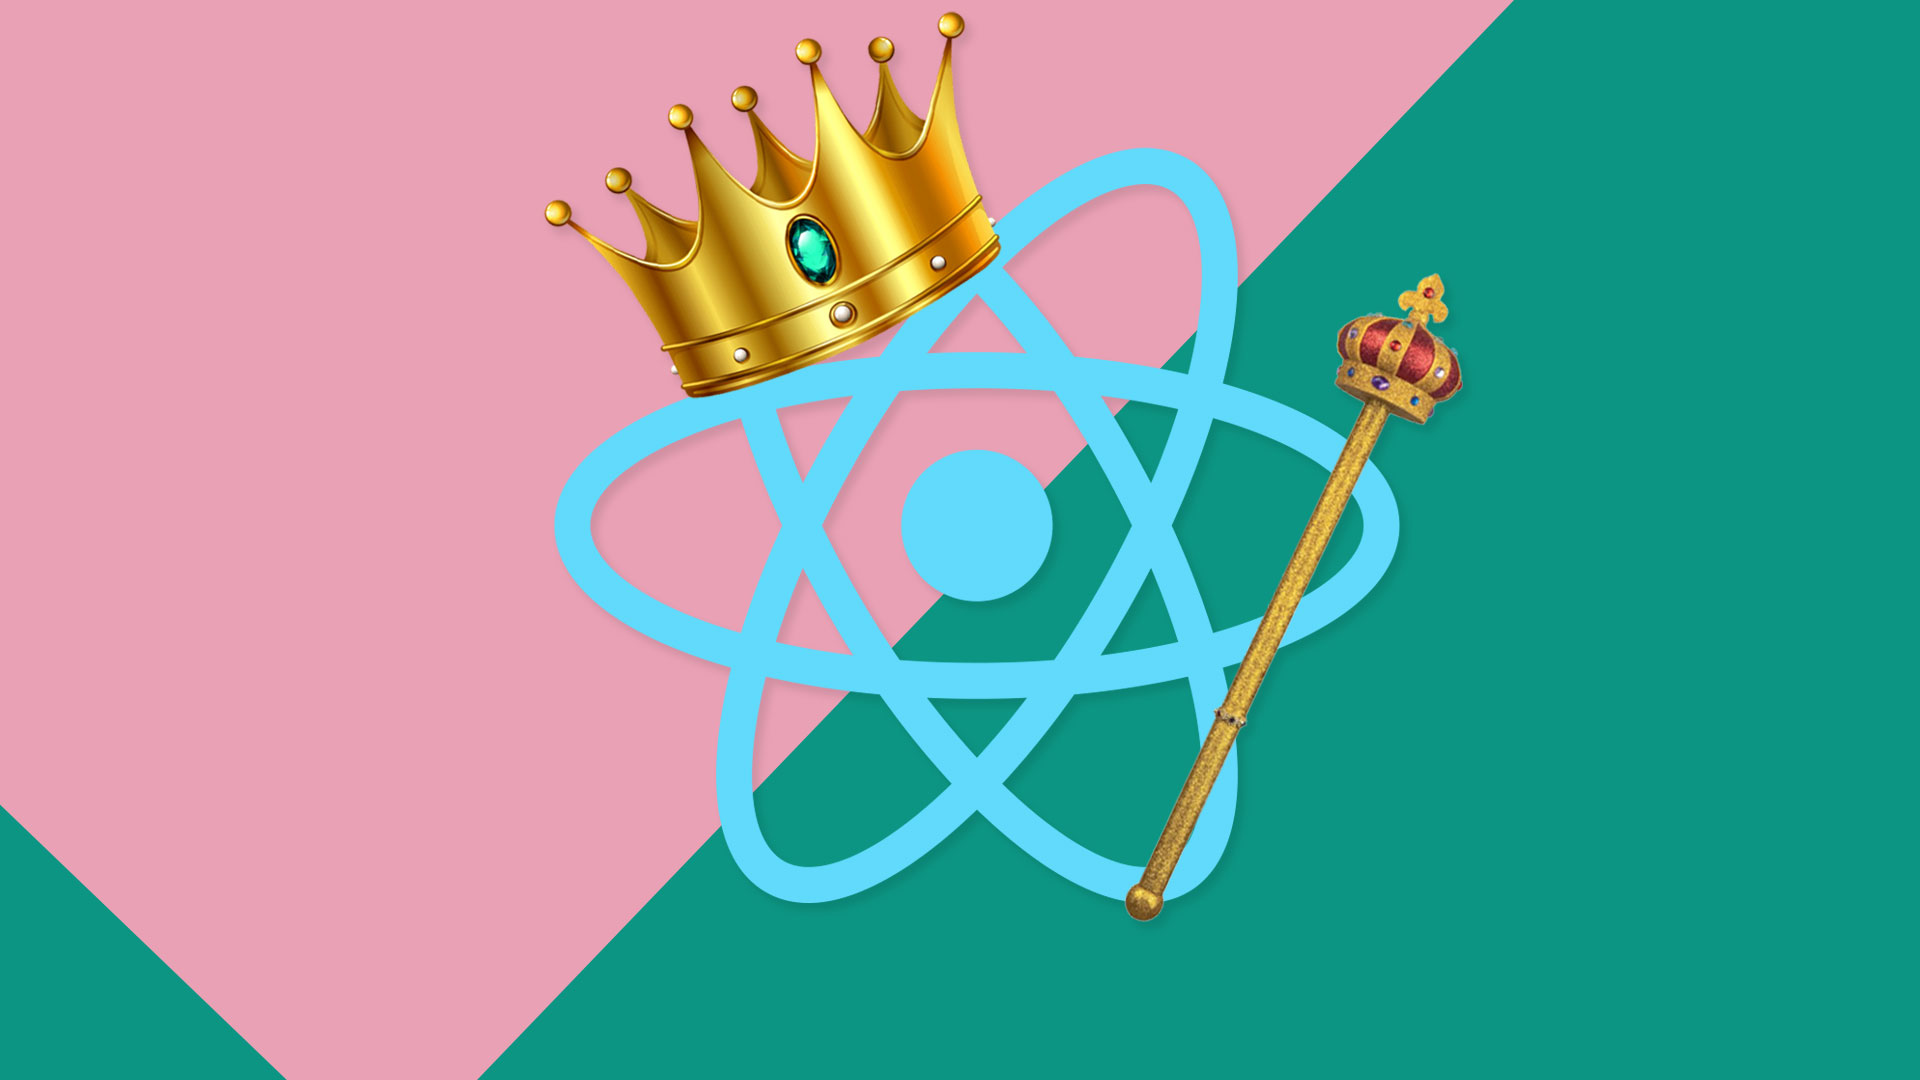 react logo with crown and sceptre